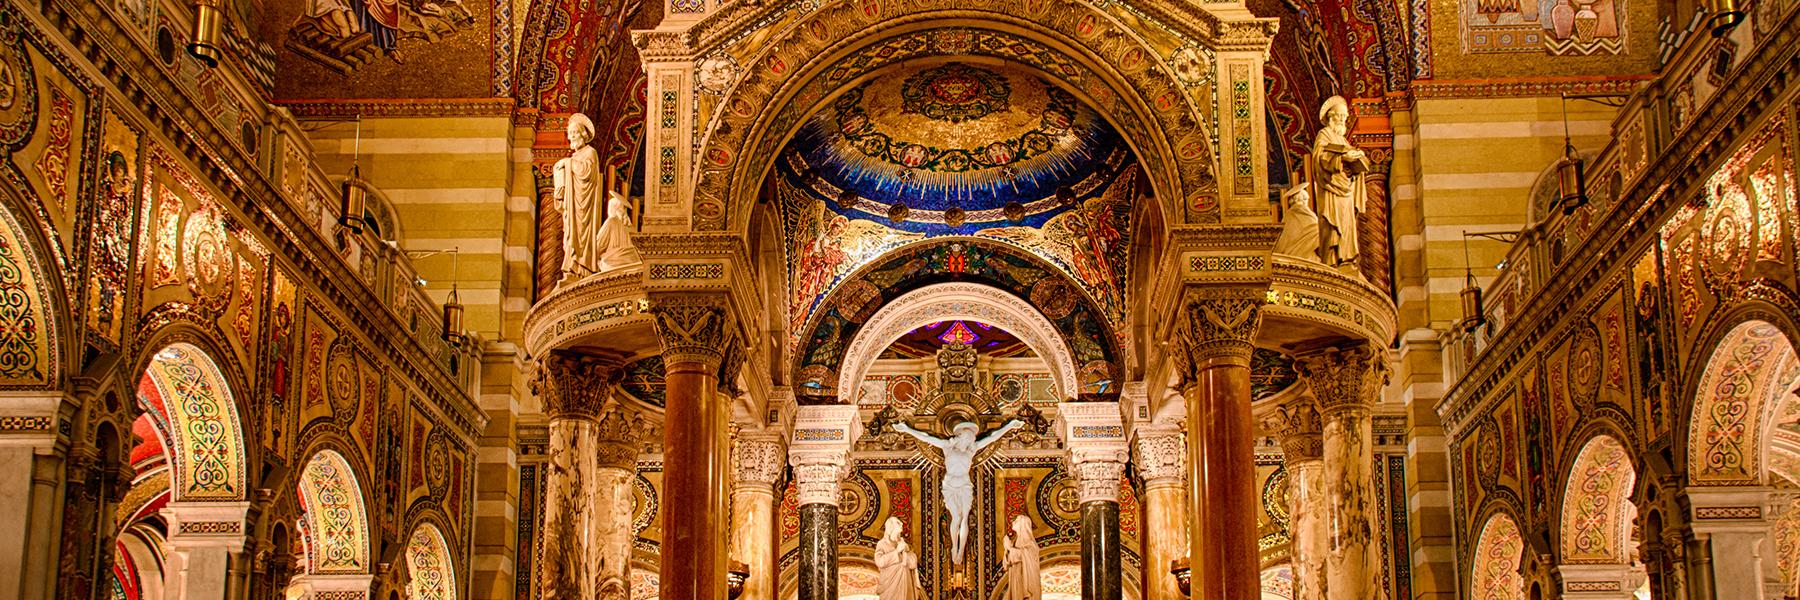 The Cathedral Basilica St. Louis houses one of the largest collections of mosaic art in the world.